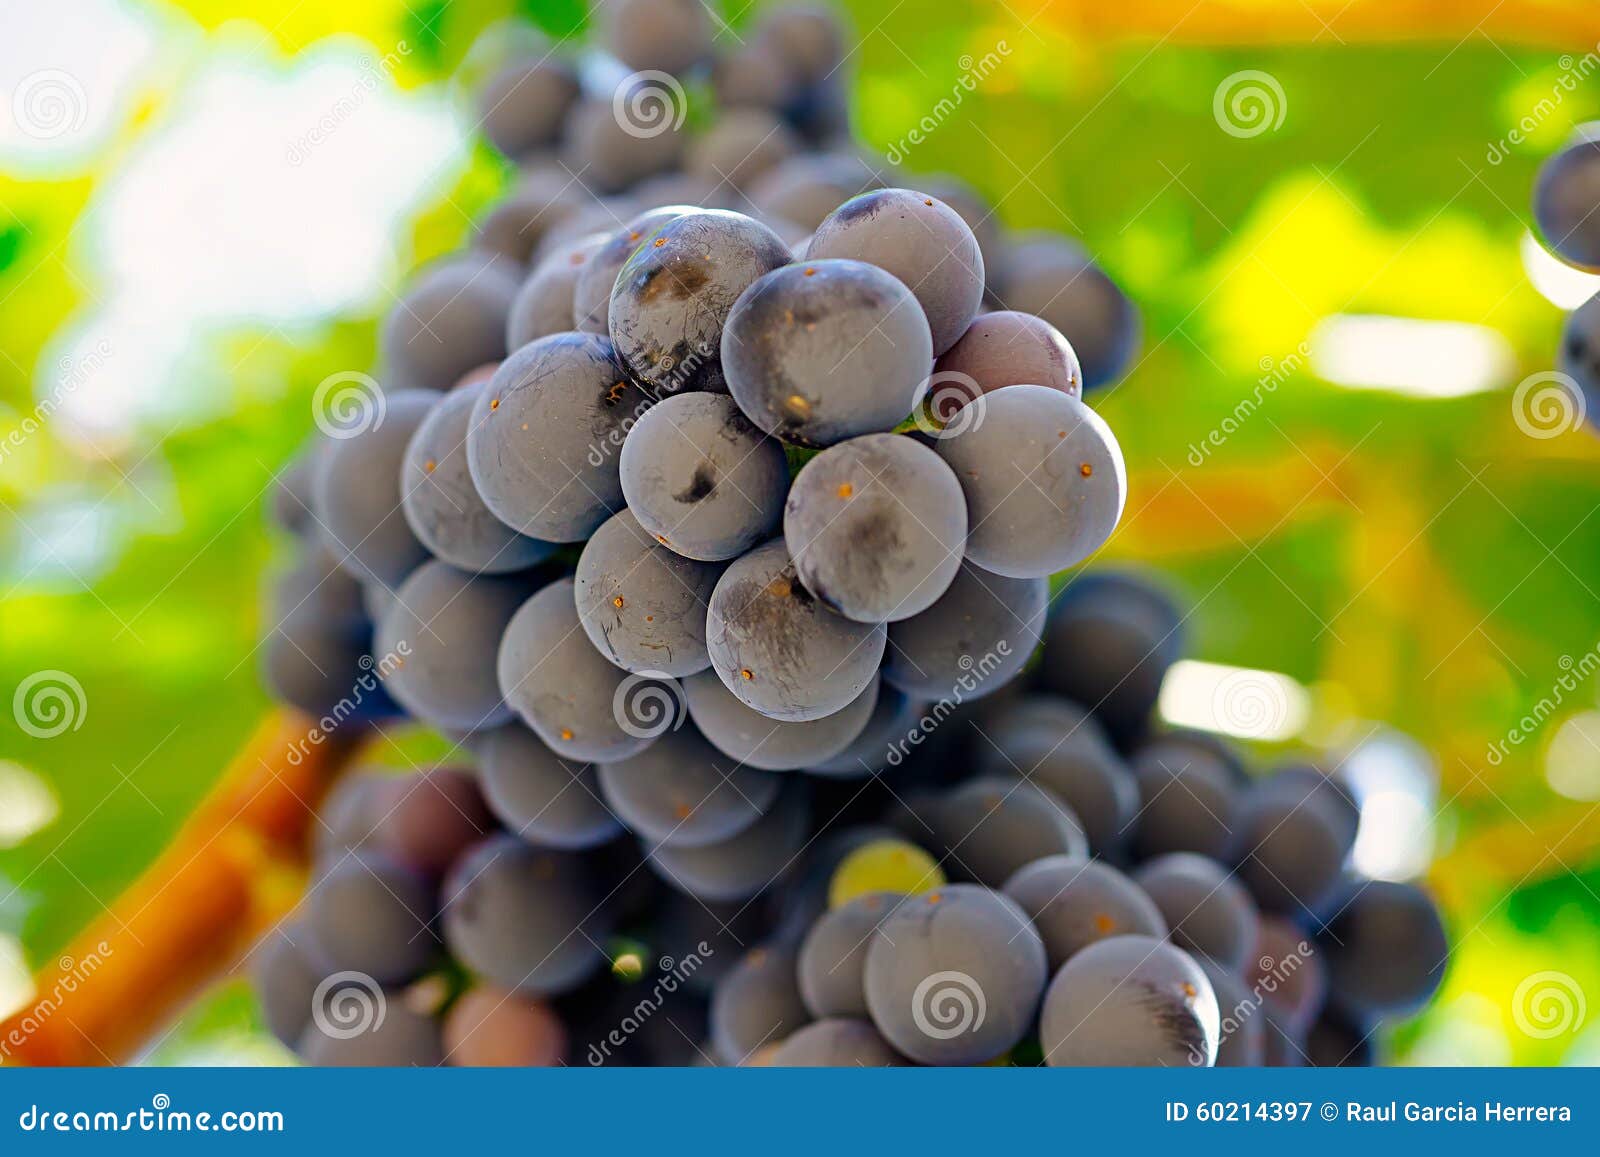 red grapes on the vine. tinta de toro grape. view from below